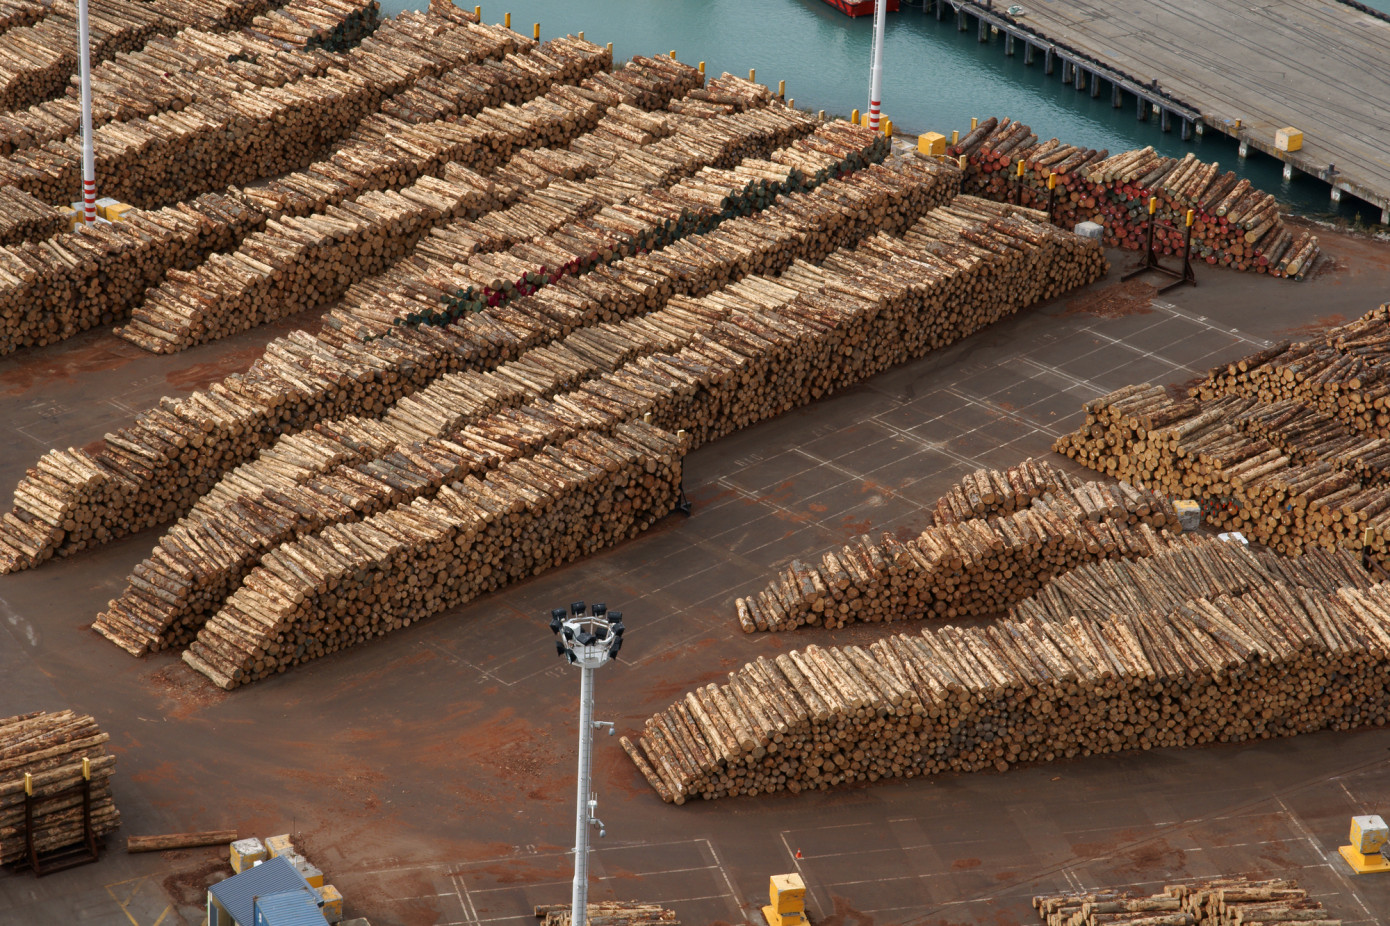 Russian exports sawlog price increase 13.3% in July 2021